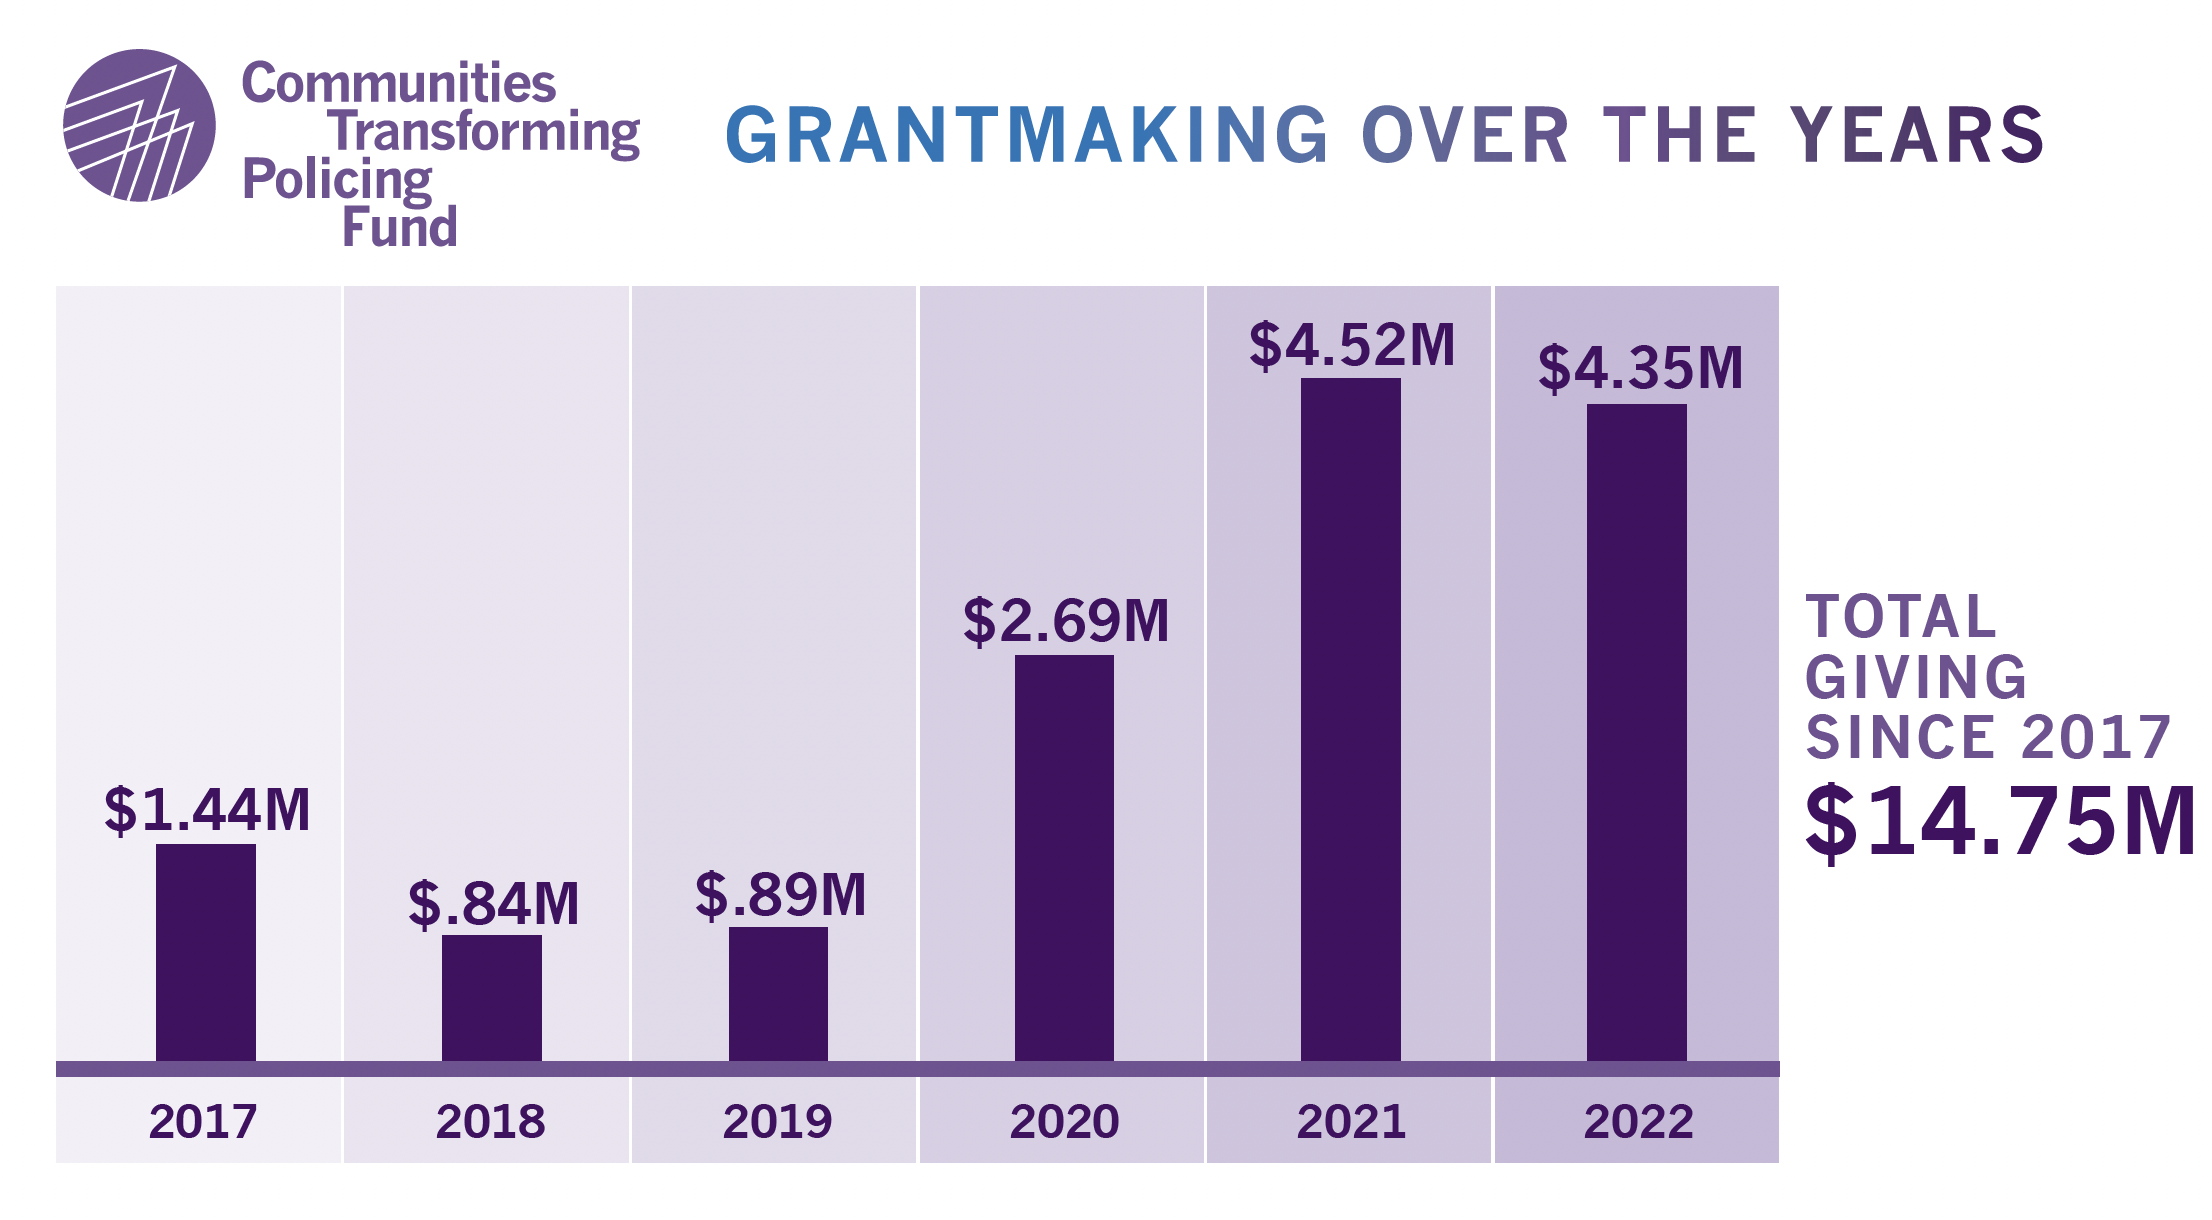 Graph: CTPF’s grantmaking over the years. 2017: $1,440,000 2018: $845,000 2019: $897,865 2020: $2,691,000 2021: $4,525,000 2022: $4,350,000. Total Giving Since 2017: $14.75M